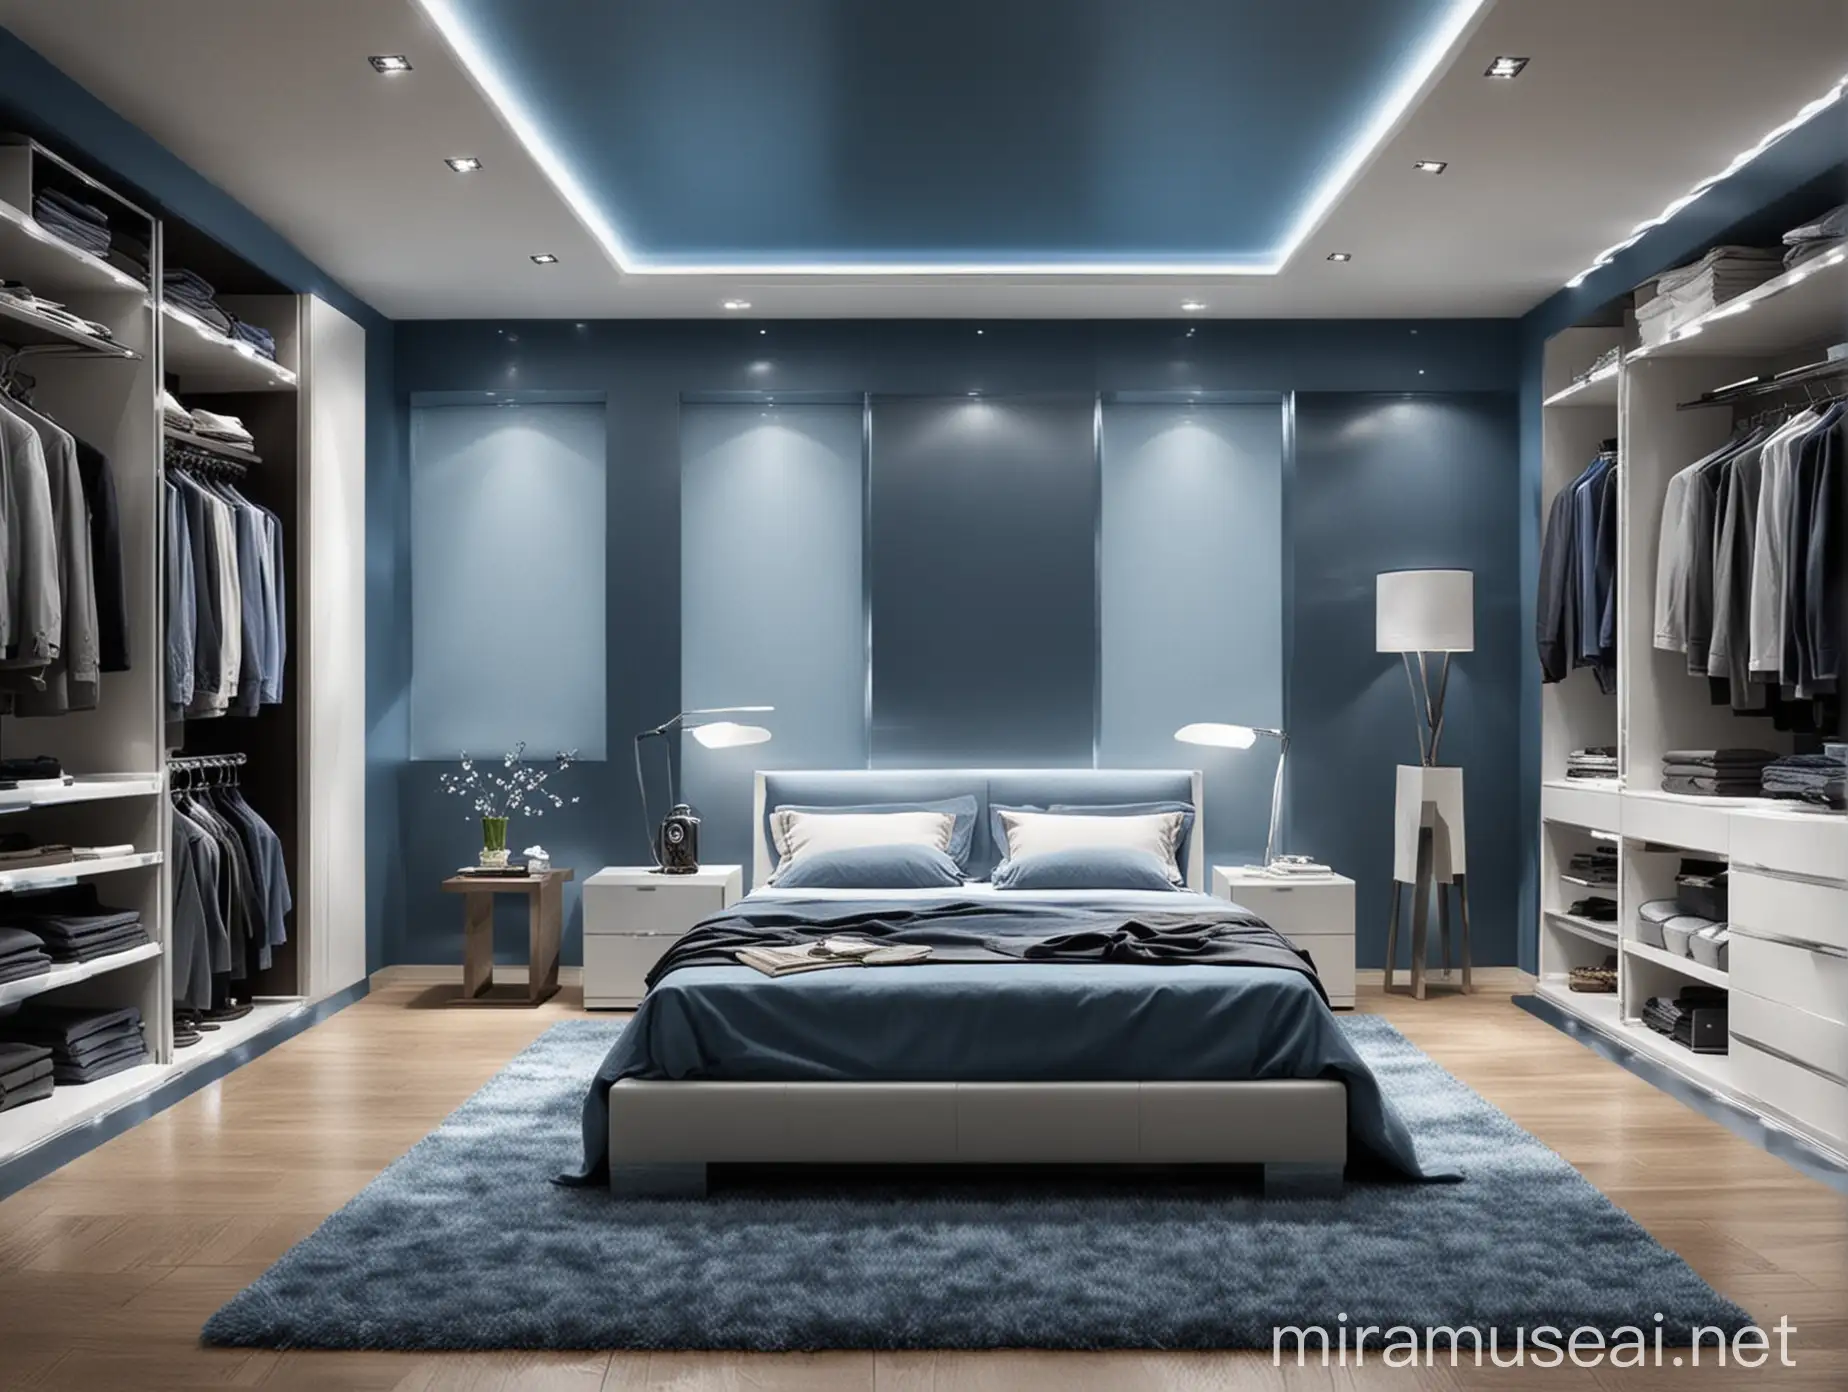 Generate an elegant middle-aged man room. It should include many man stuff like clothes and modern furnitures. The room should has futuristic environment and blue and white.